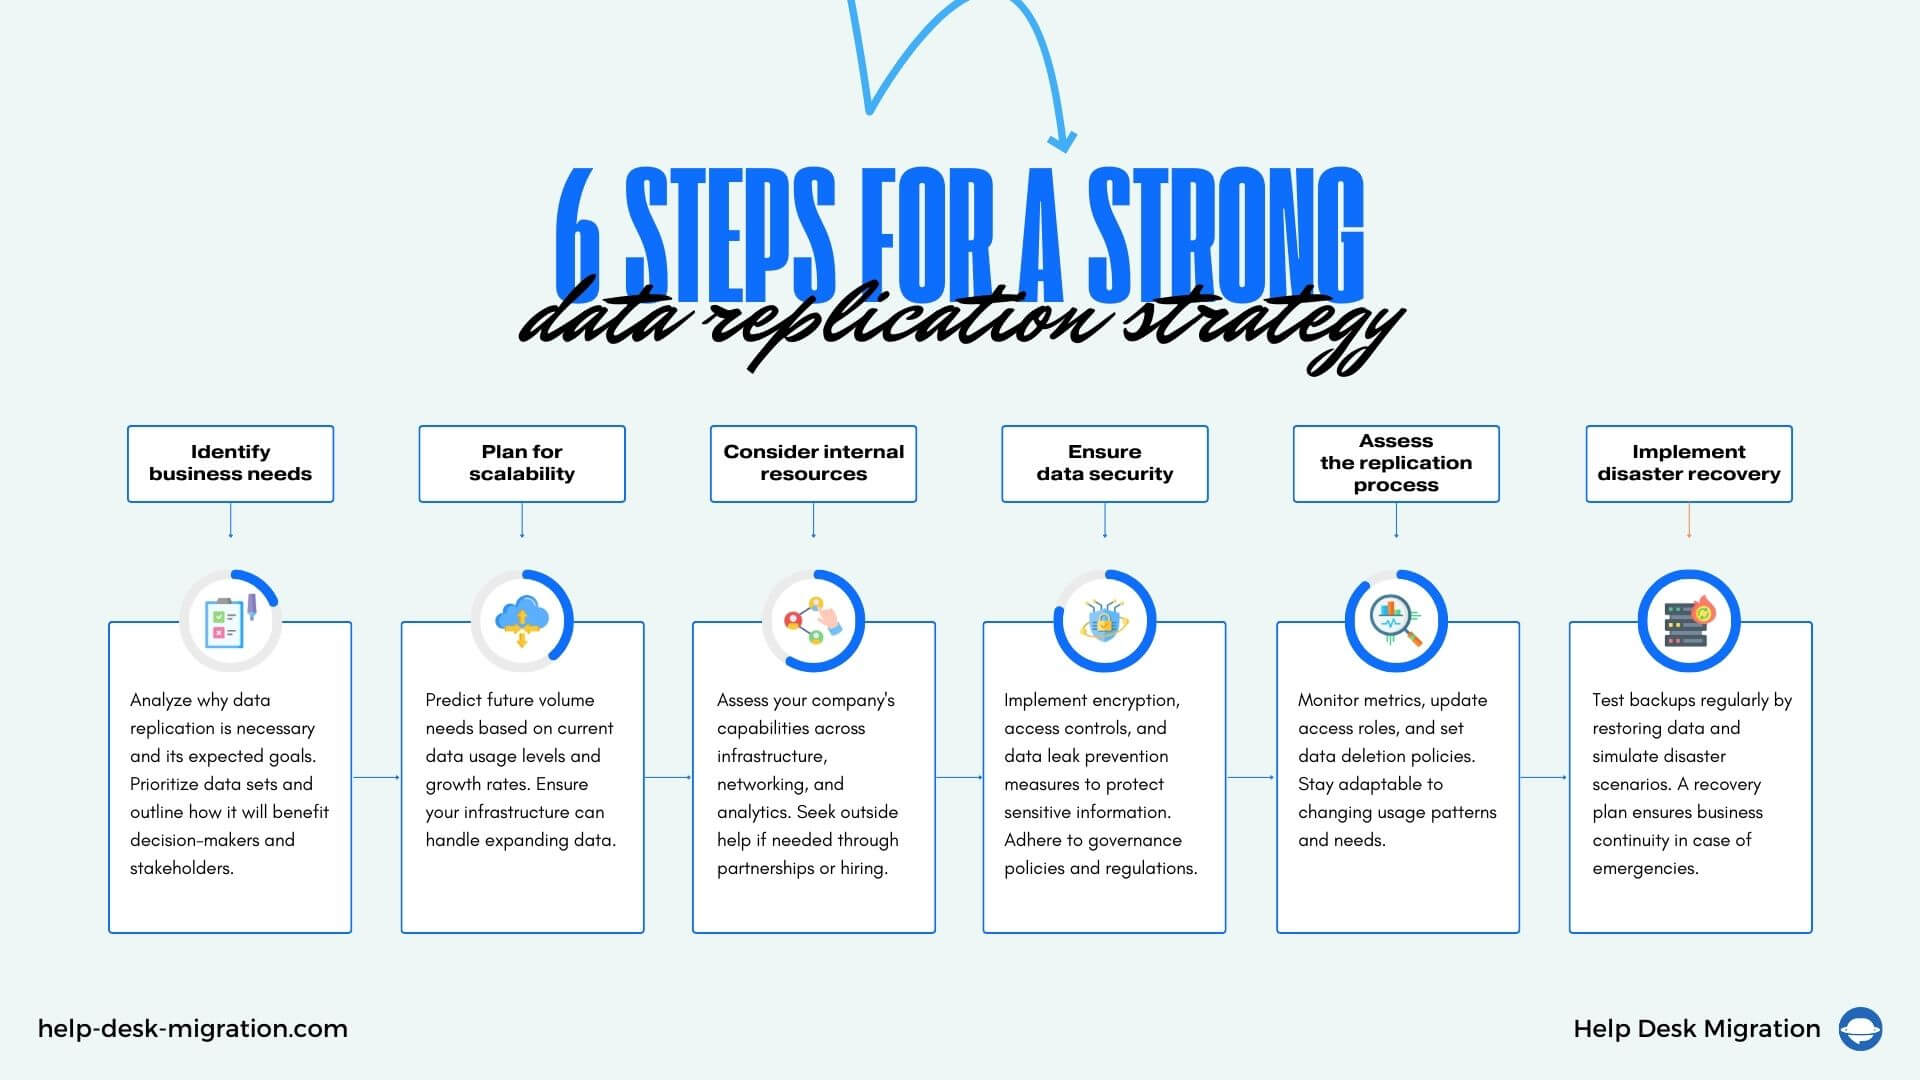 6 Steps for a Strong Data Replication Strategy | Help Desk Migration Blog